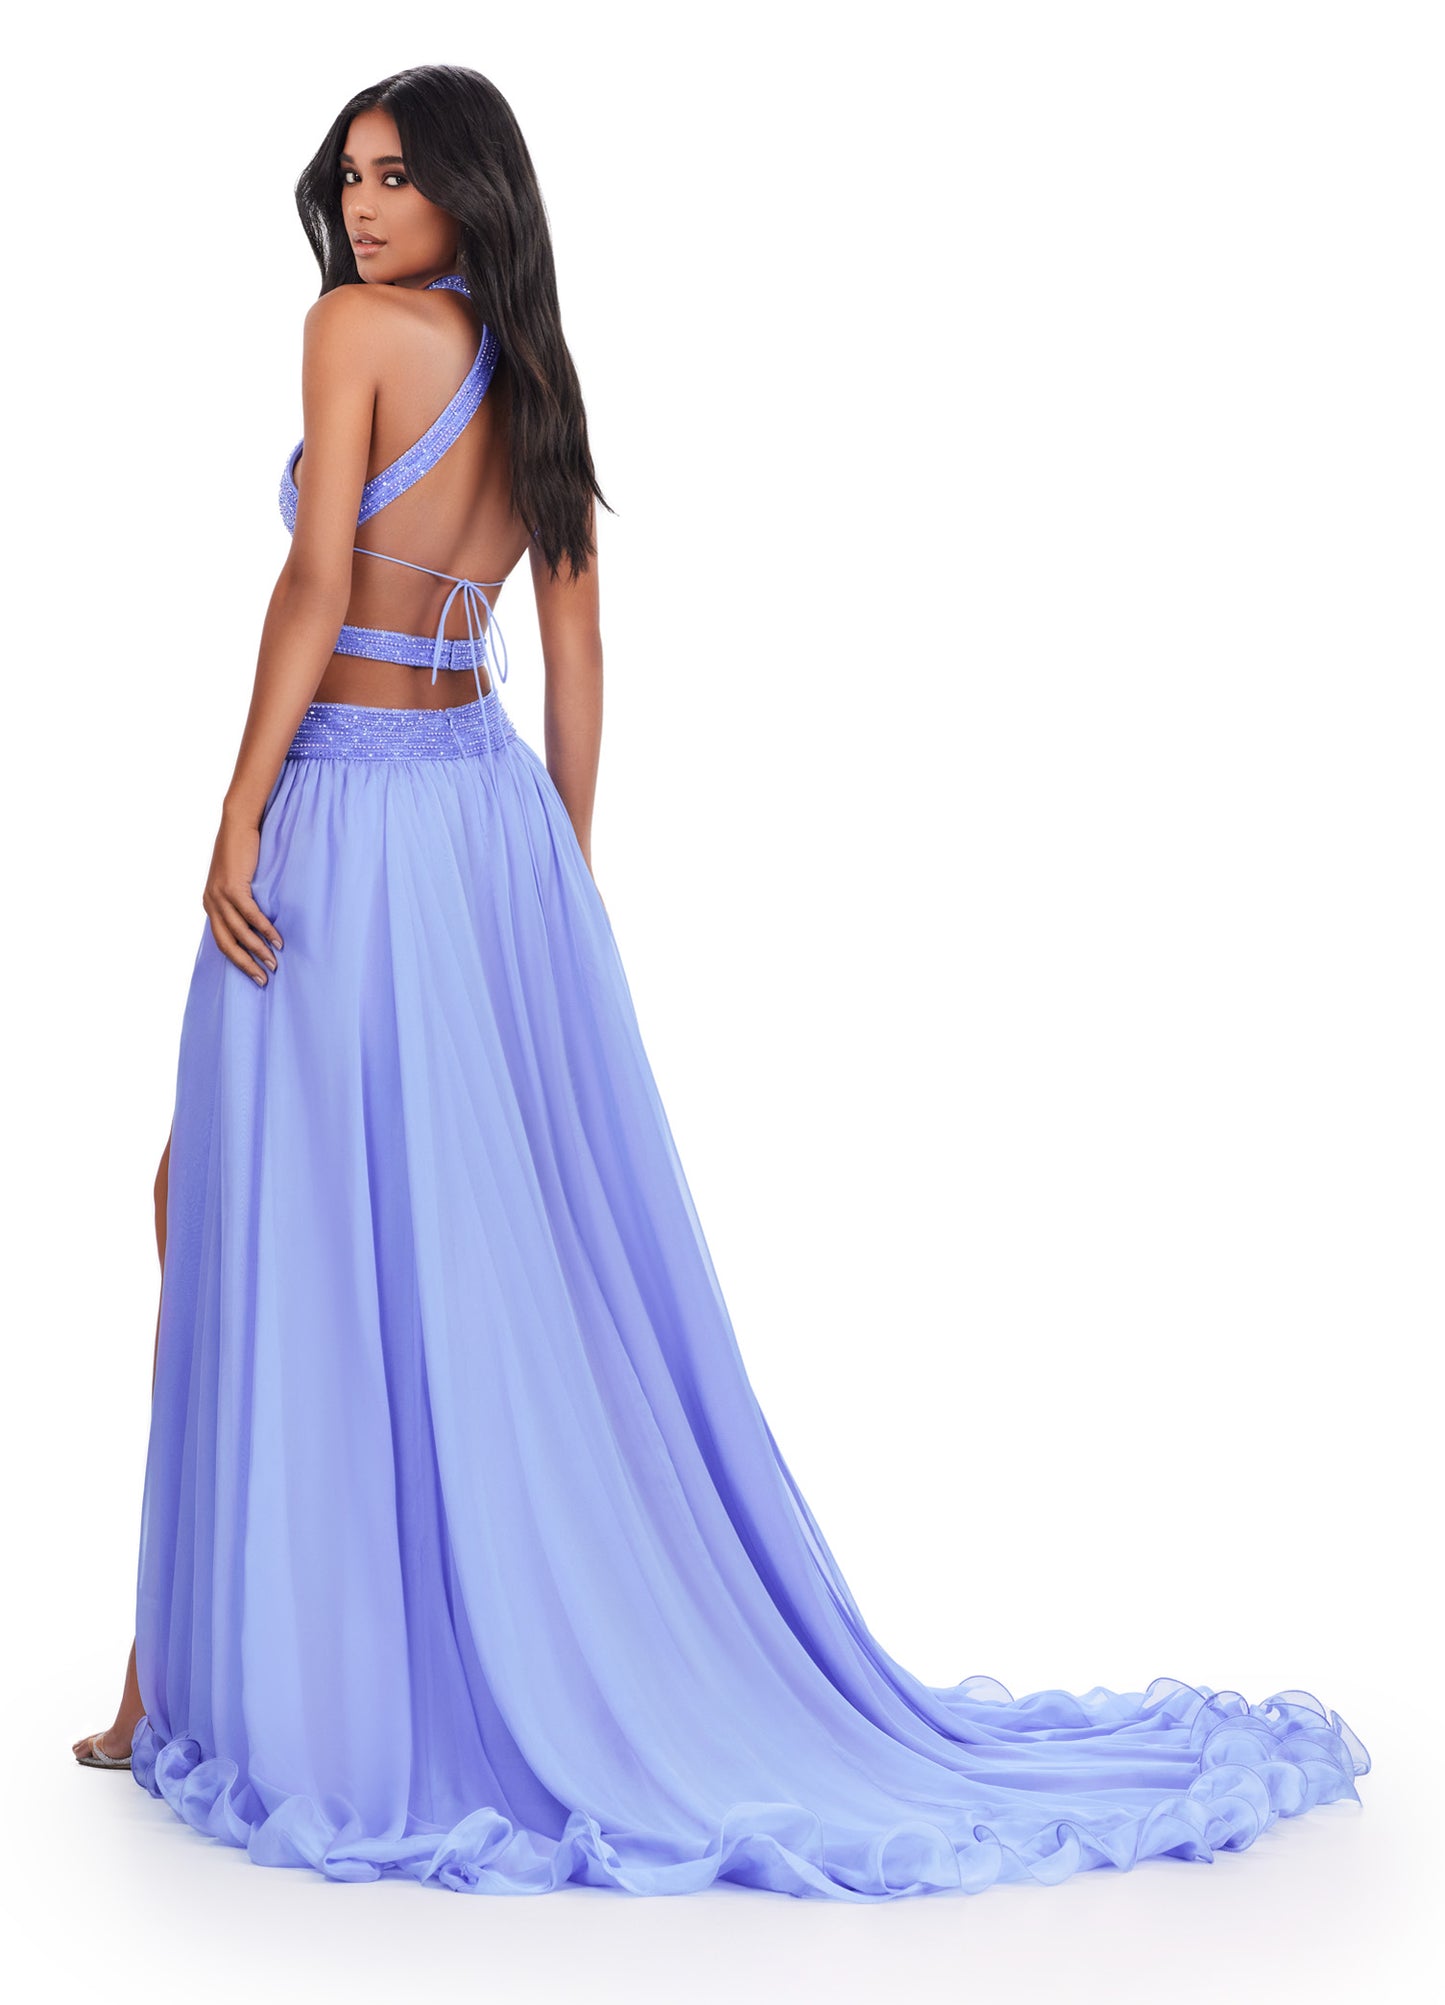 Elevate your formal attire with the Ashley Lauren 11504 Long Prom Dress. The cut out gown boasts a beaded bustier and chiffon skirt, creating a stunning silhouette that will turn heads. Perfect for prom, pageants, or any special occasion. Make a statement in this elegant and fashionable dress. Feel like royalty in this fabulous chiffon gown. The fully beaded bustier features intricate cut outs and an open back that'll be sure to set you apart from the crowd.